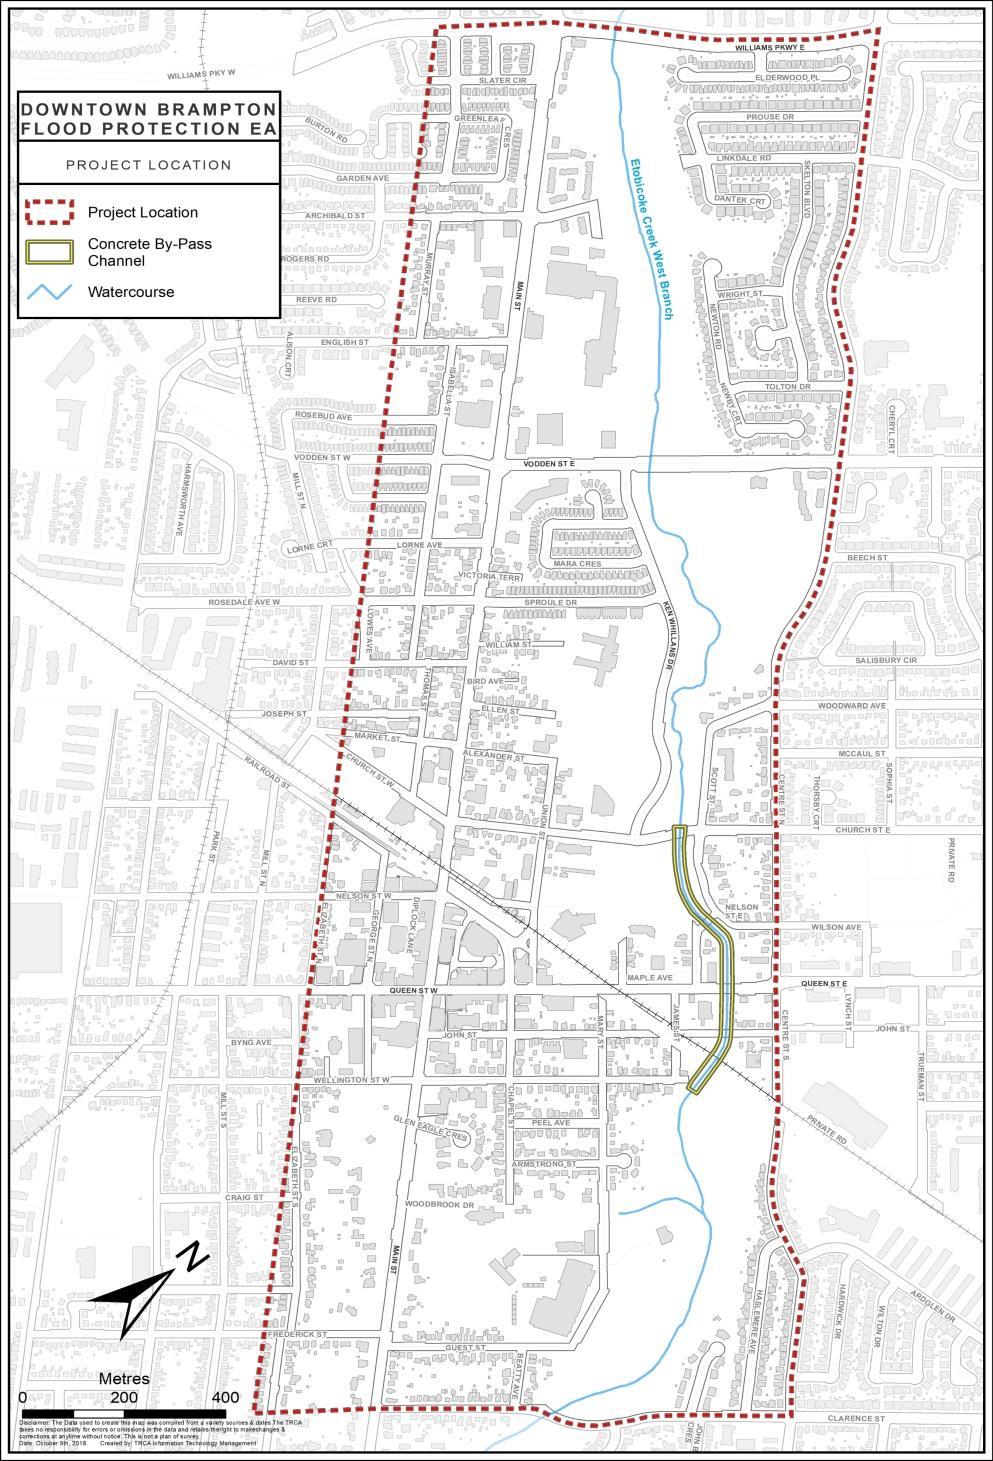 Project overview Study location Existing flood protection (a concrete-lined bypass channel), cannot convey